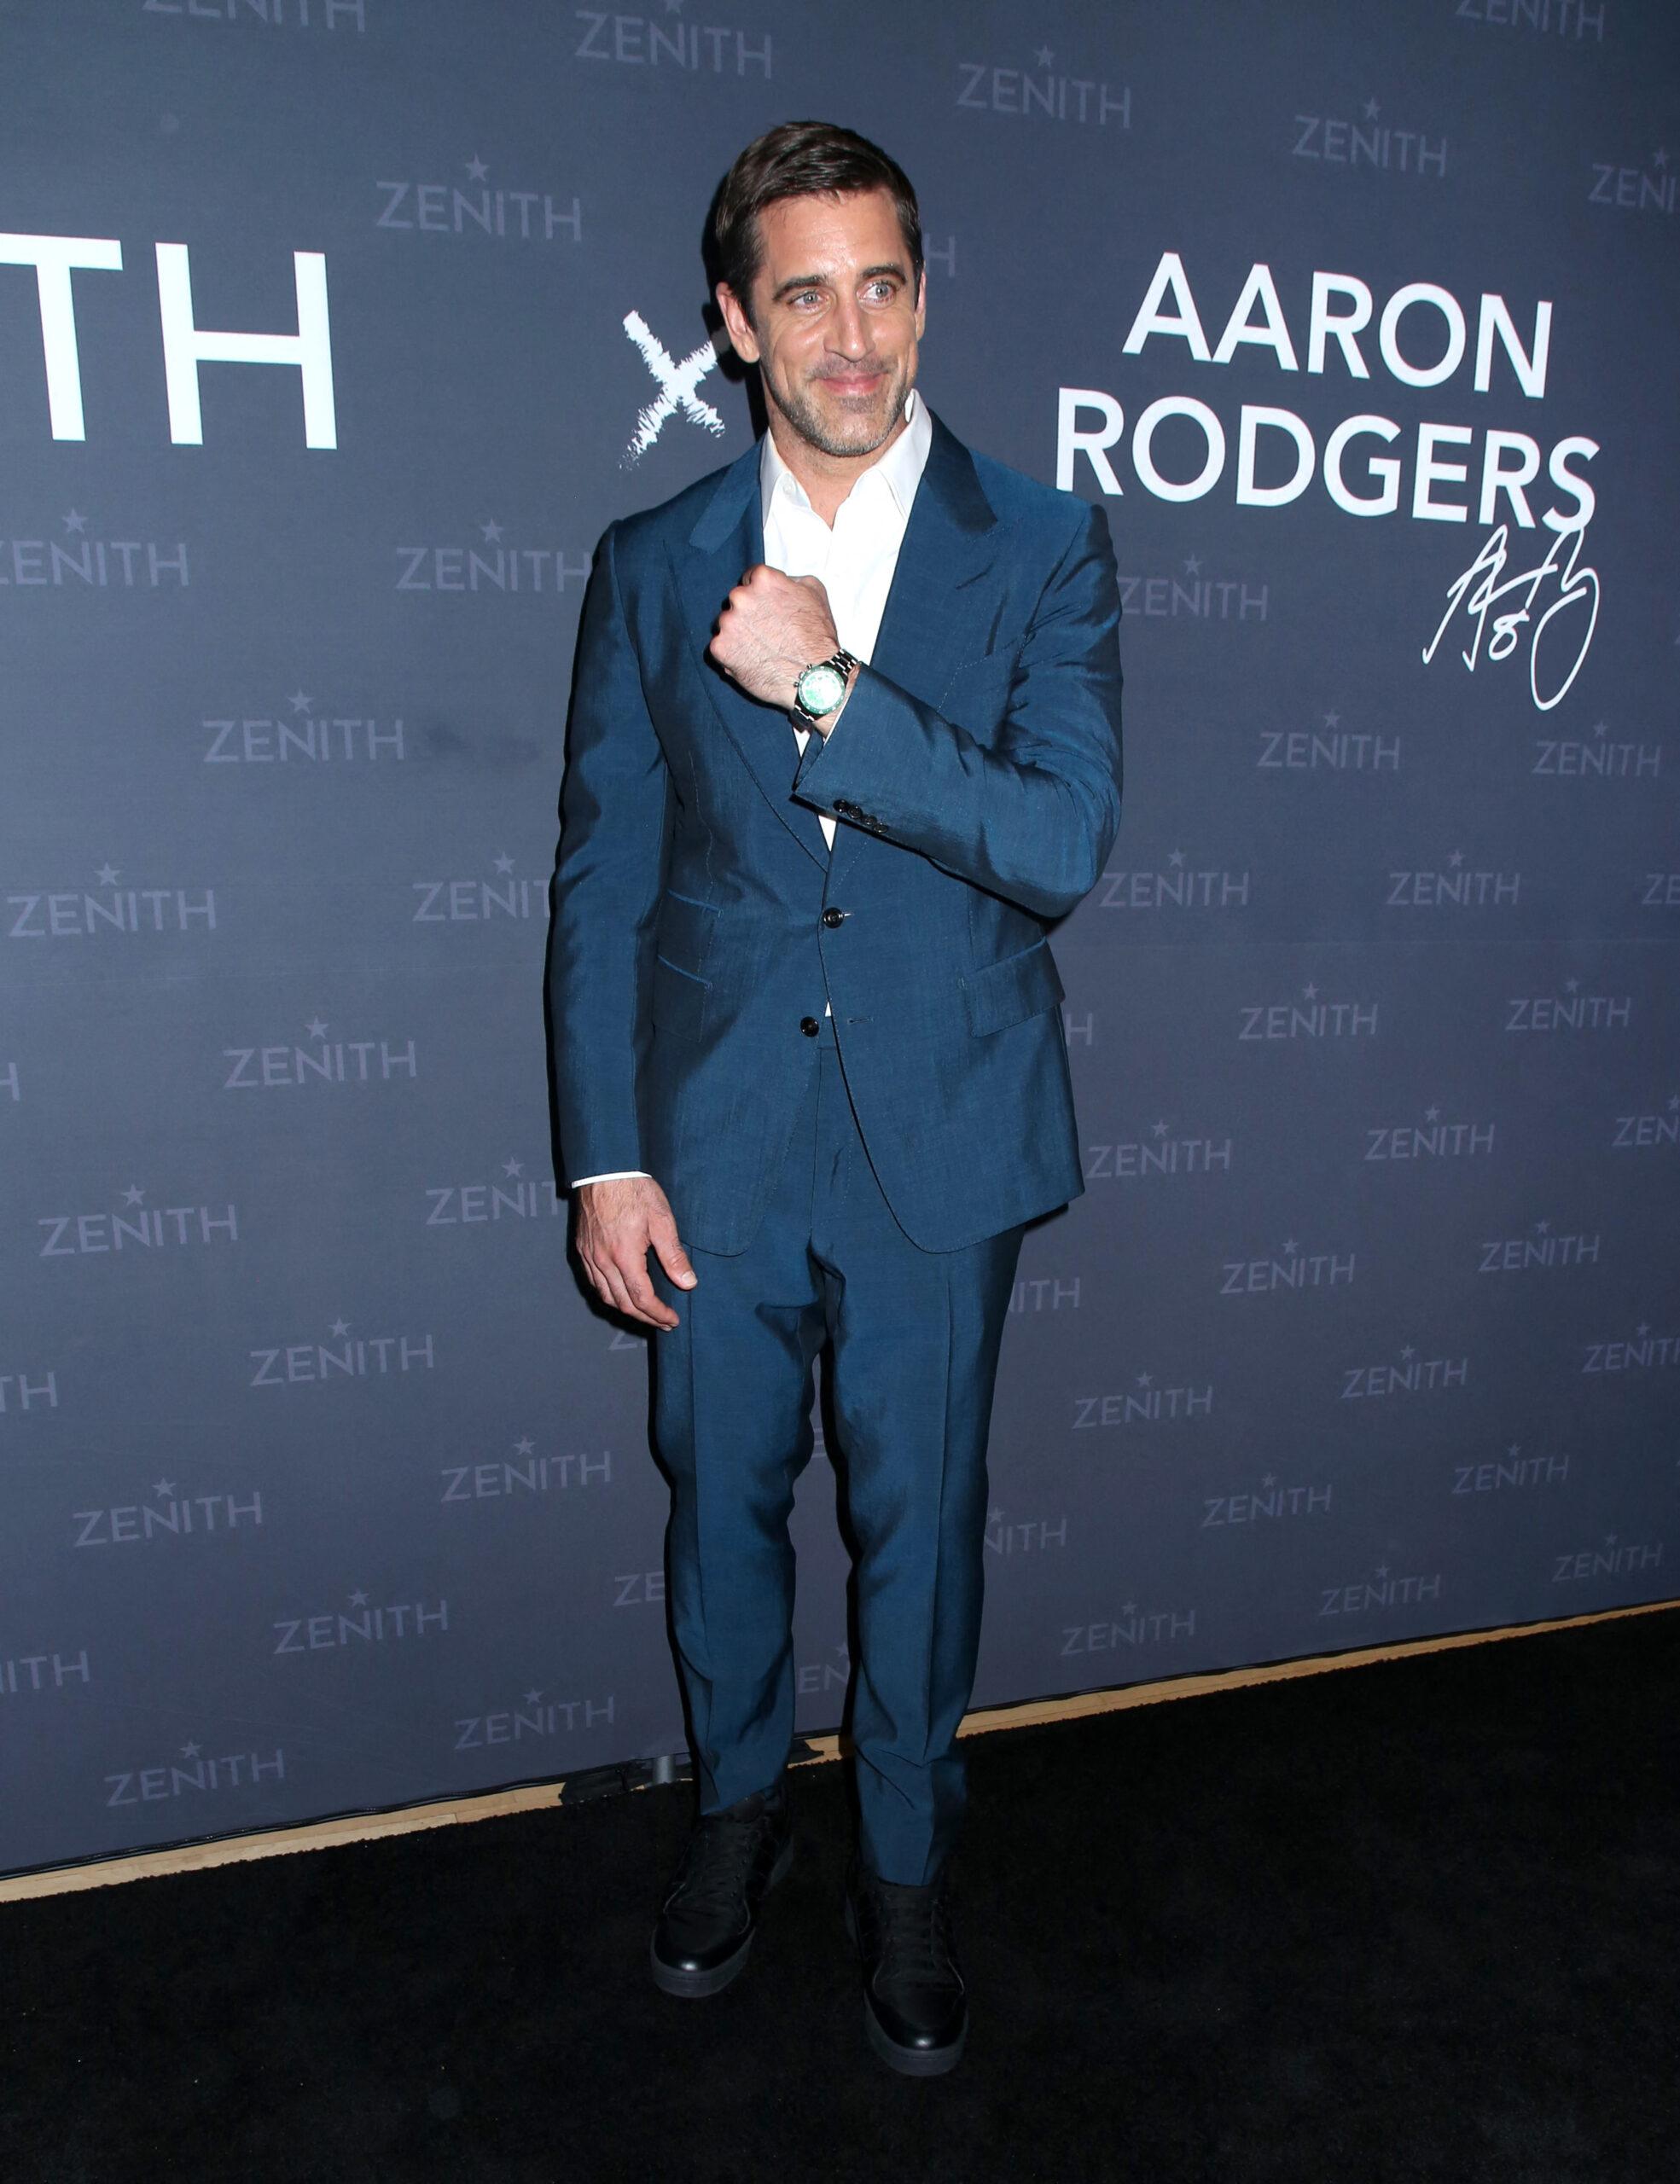 Zenith Unveils Limited Edition Watch Designed by Brand Ambassador Aaron Rodgers